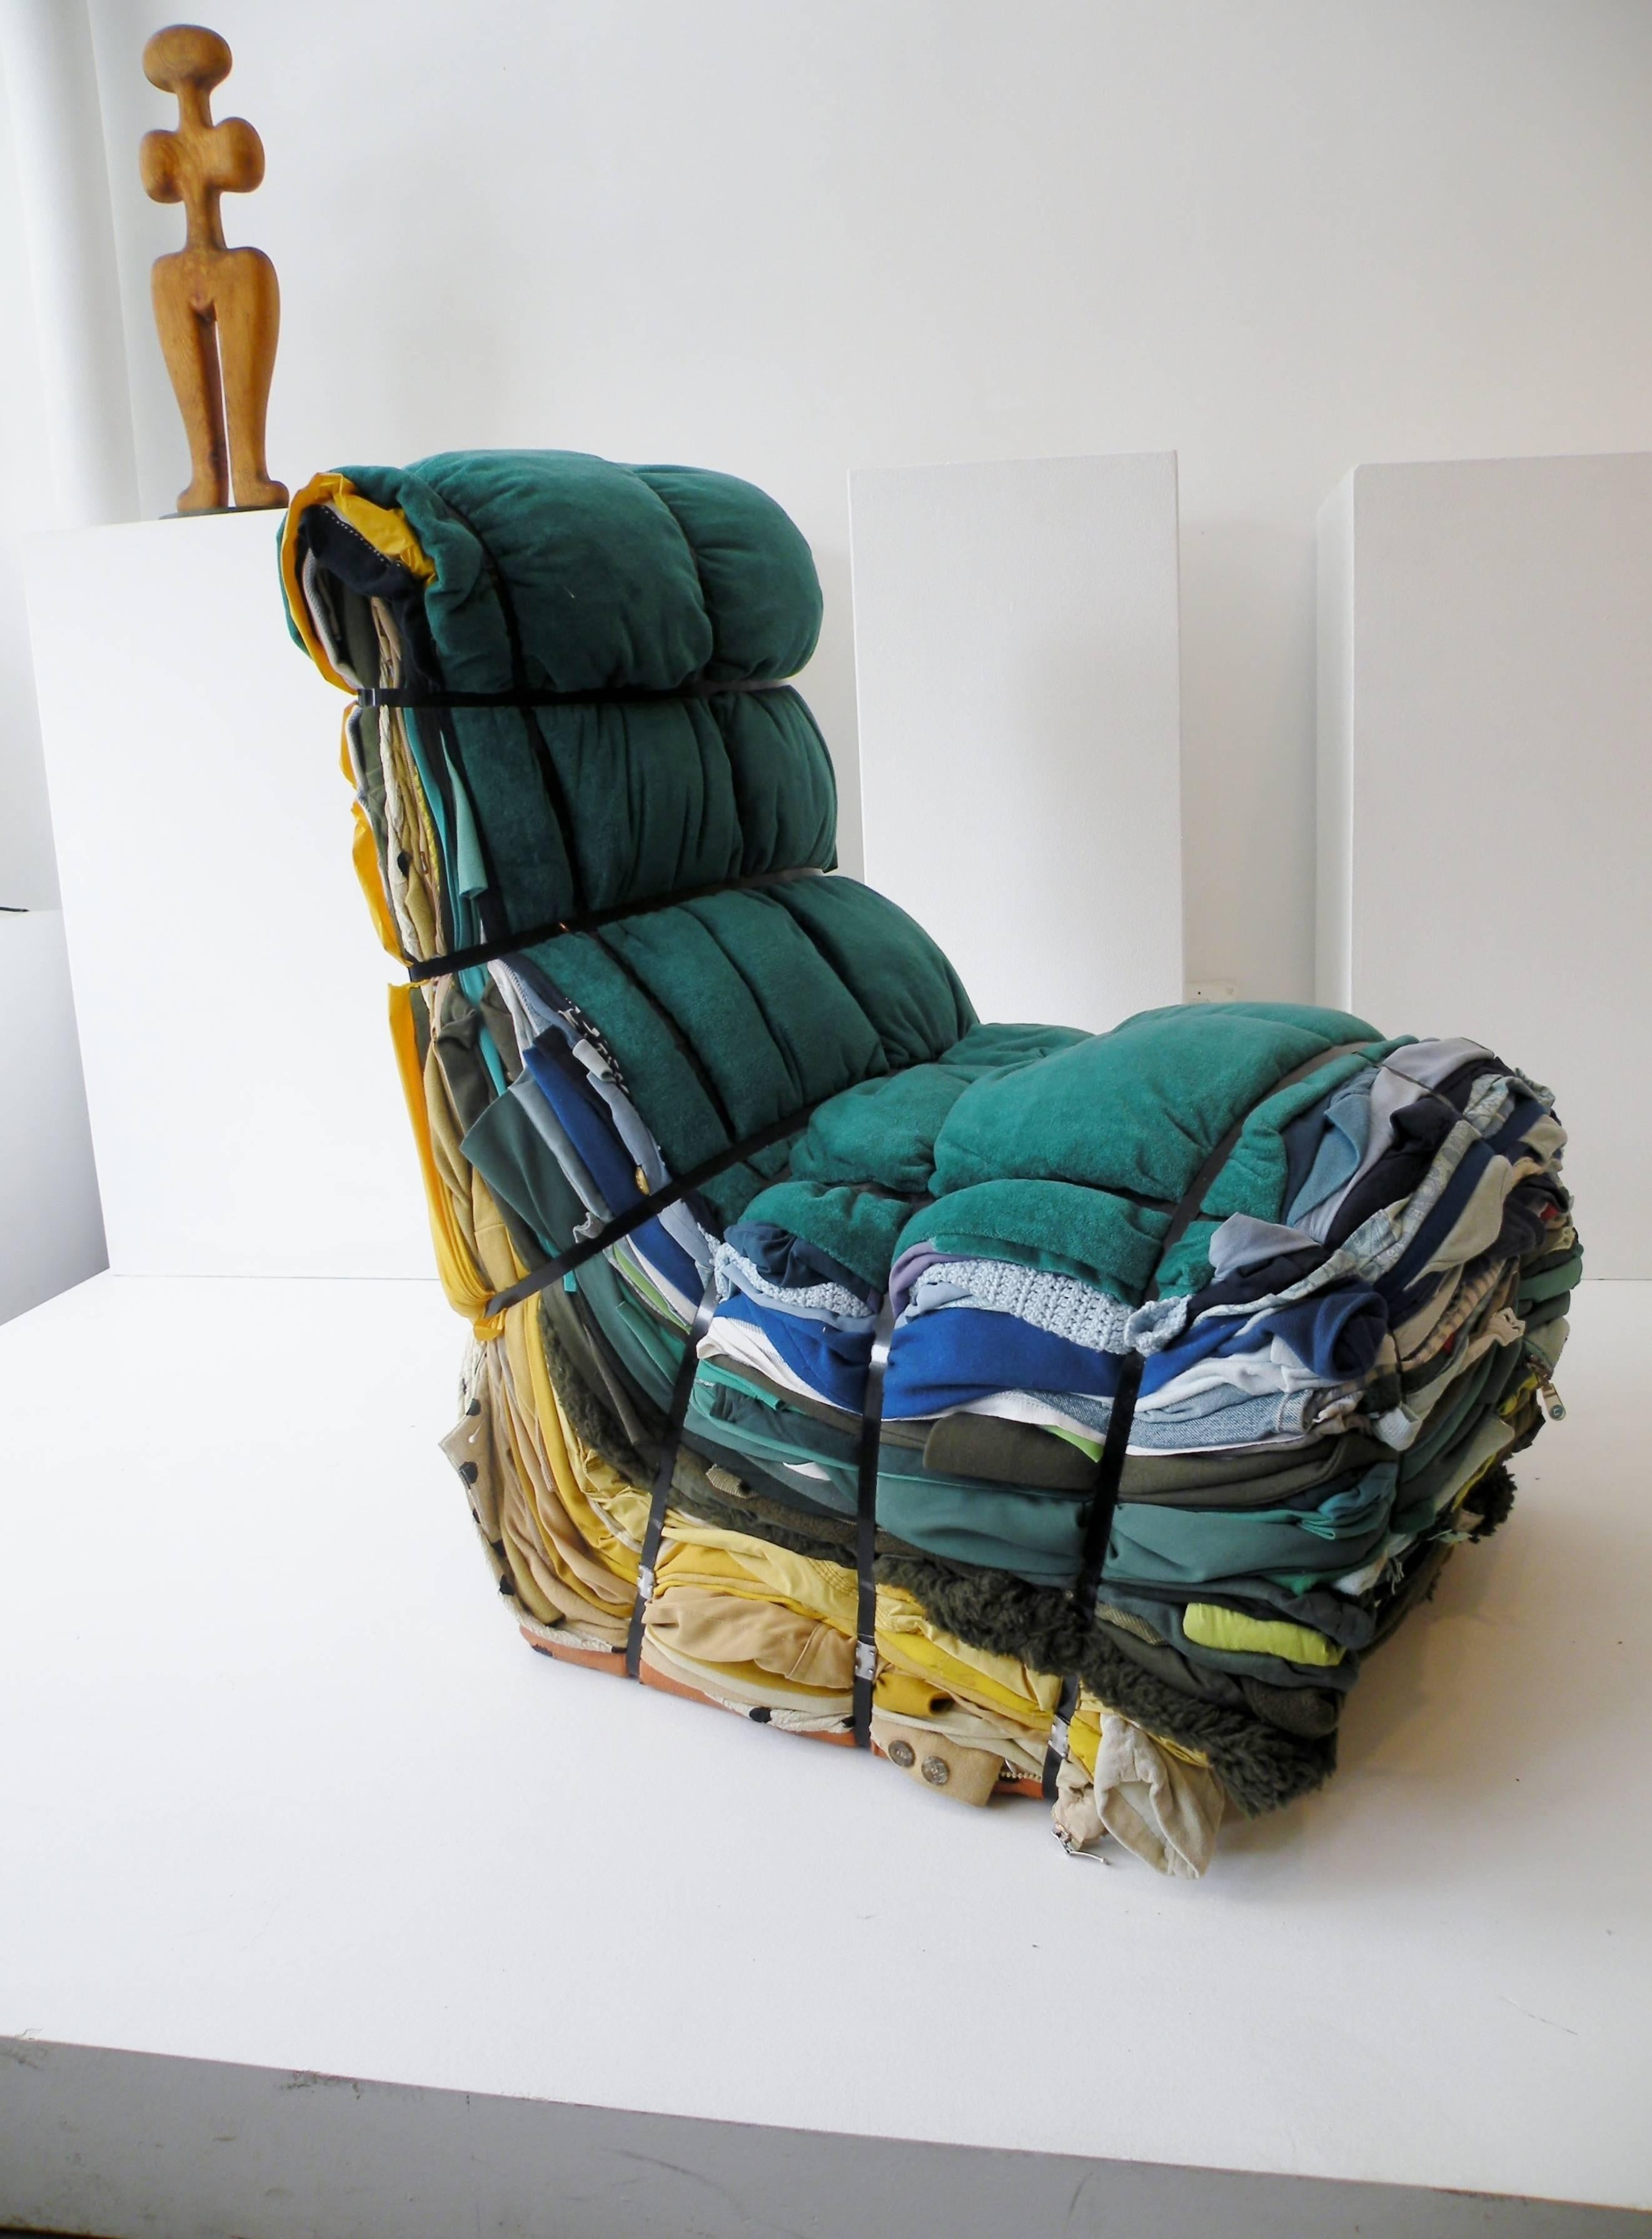 Tejo Remy (Dutch b. 1960) designed rag chair for Droog design and produced in 1991. Iconic design each individually hand crafted of 100+ pounds of clothing rags bound with steel straps.